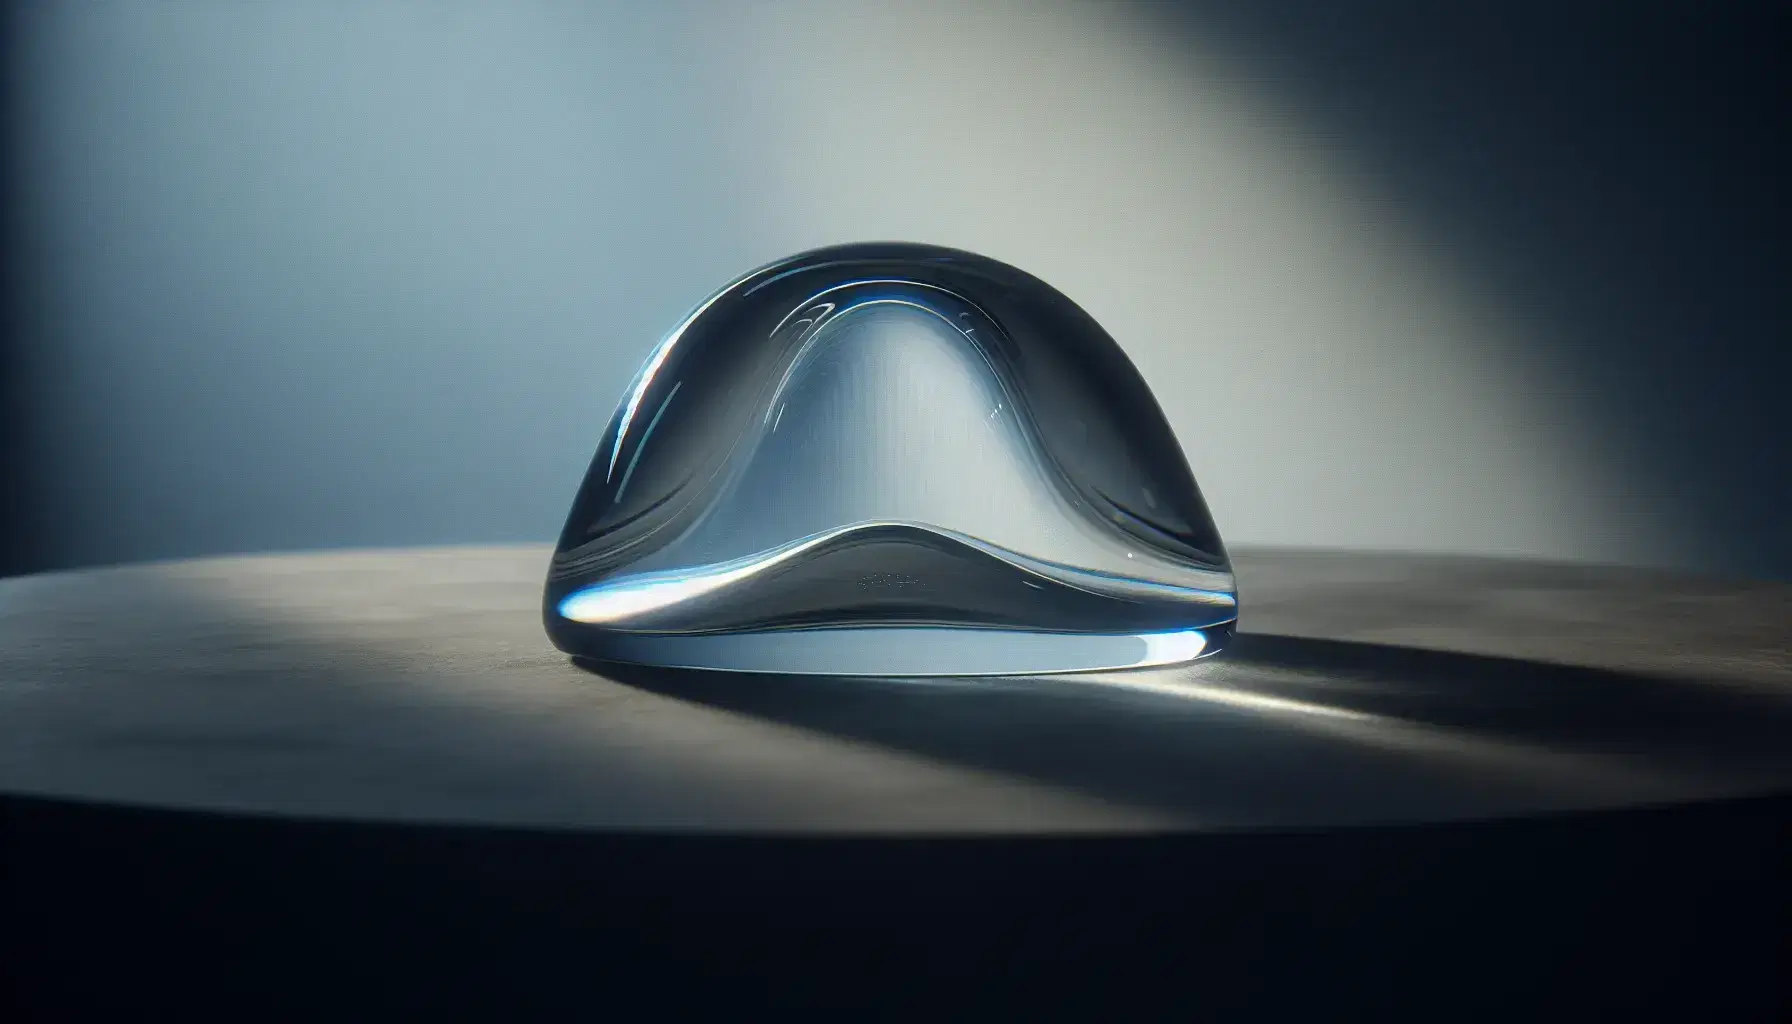 Transparent glass sculpture with blue shades in the shape of a Gauss curve on a dark matte surface, with light shadow and blue-gray gradient background.